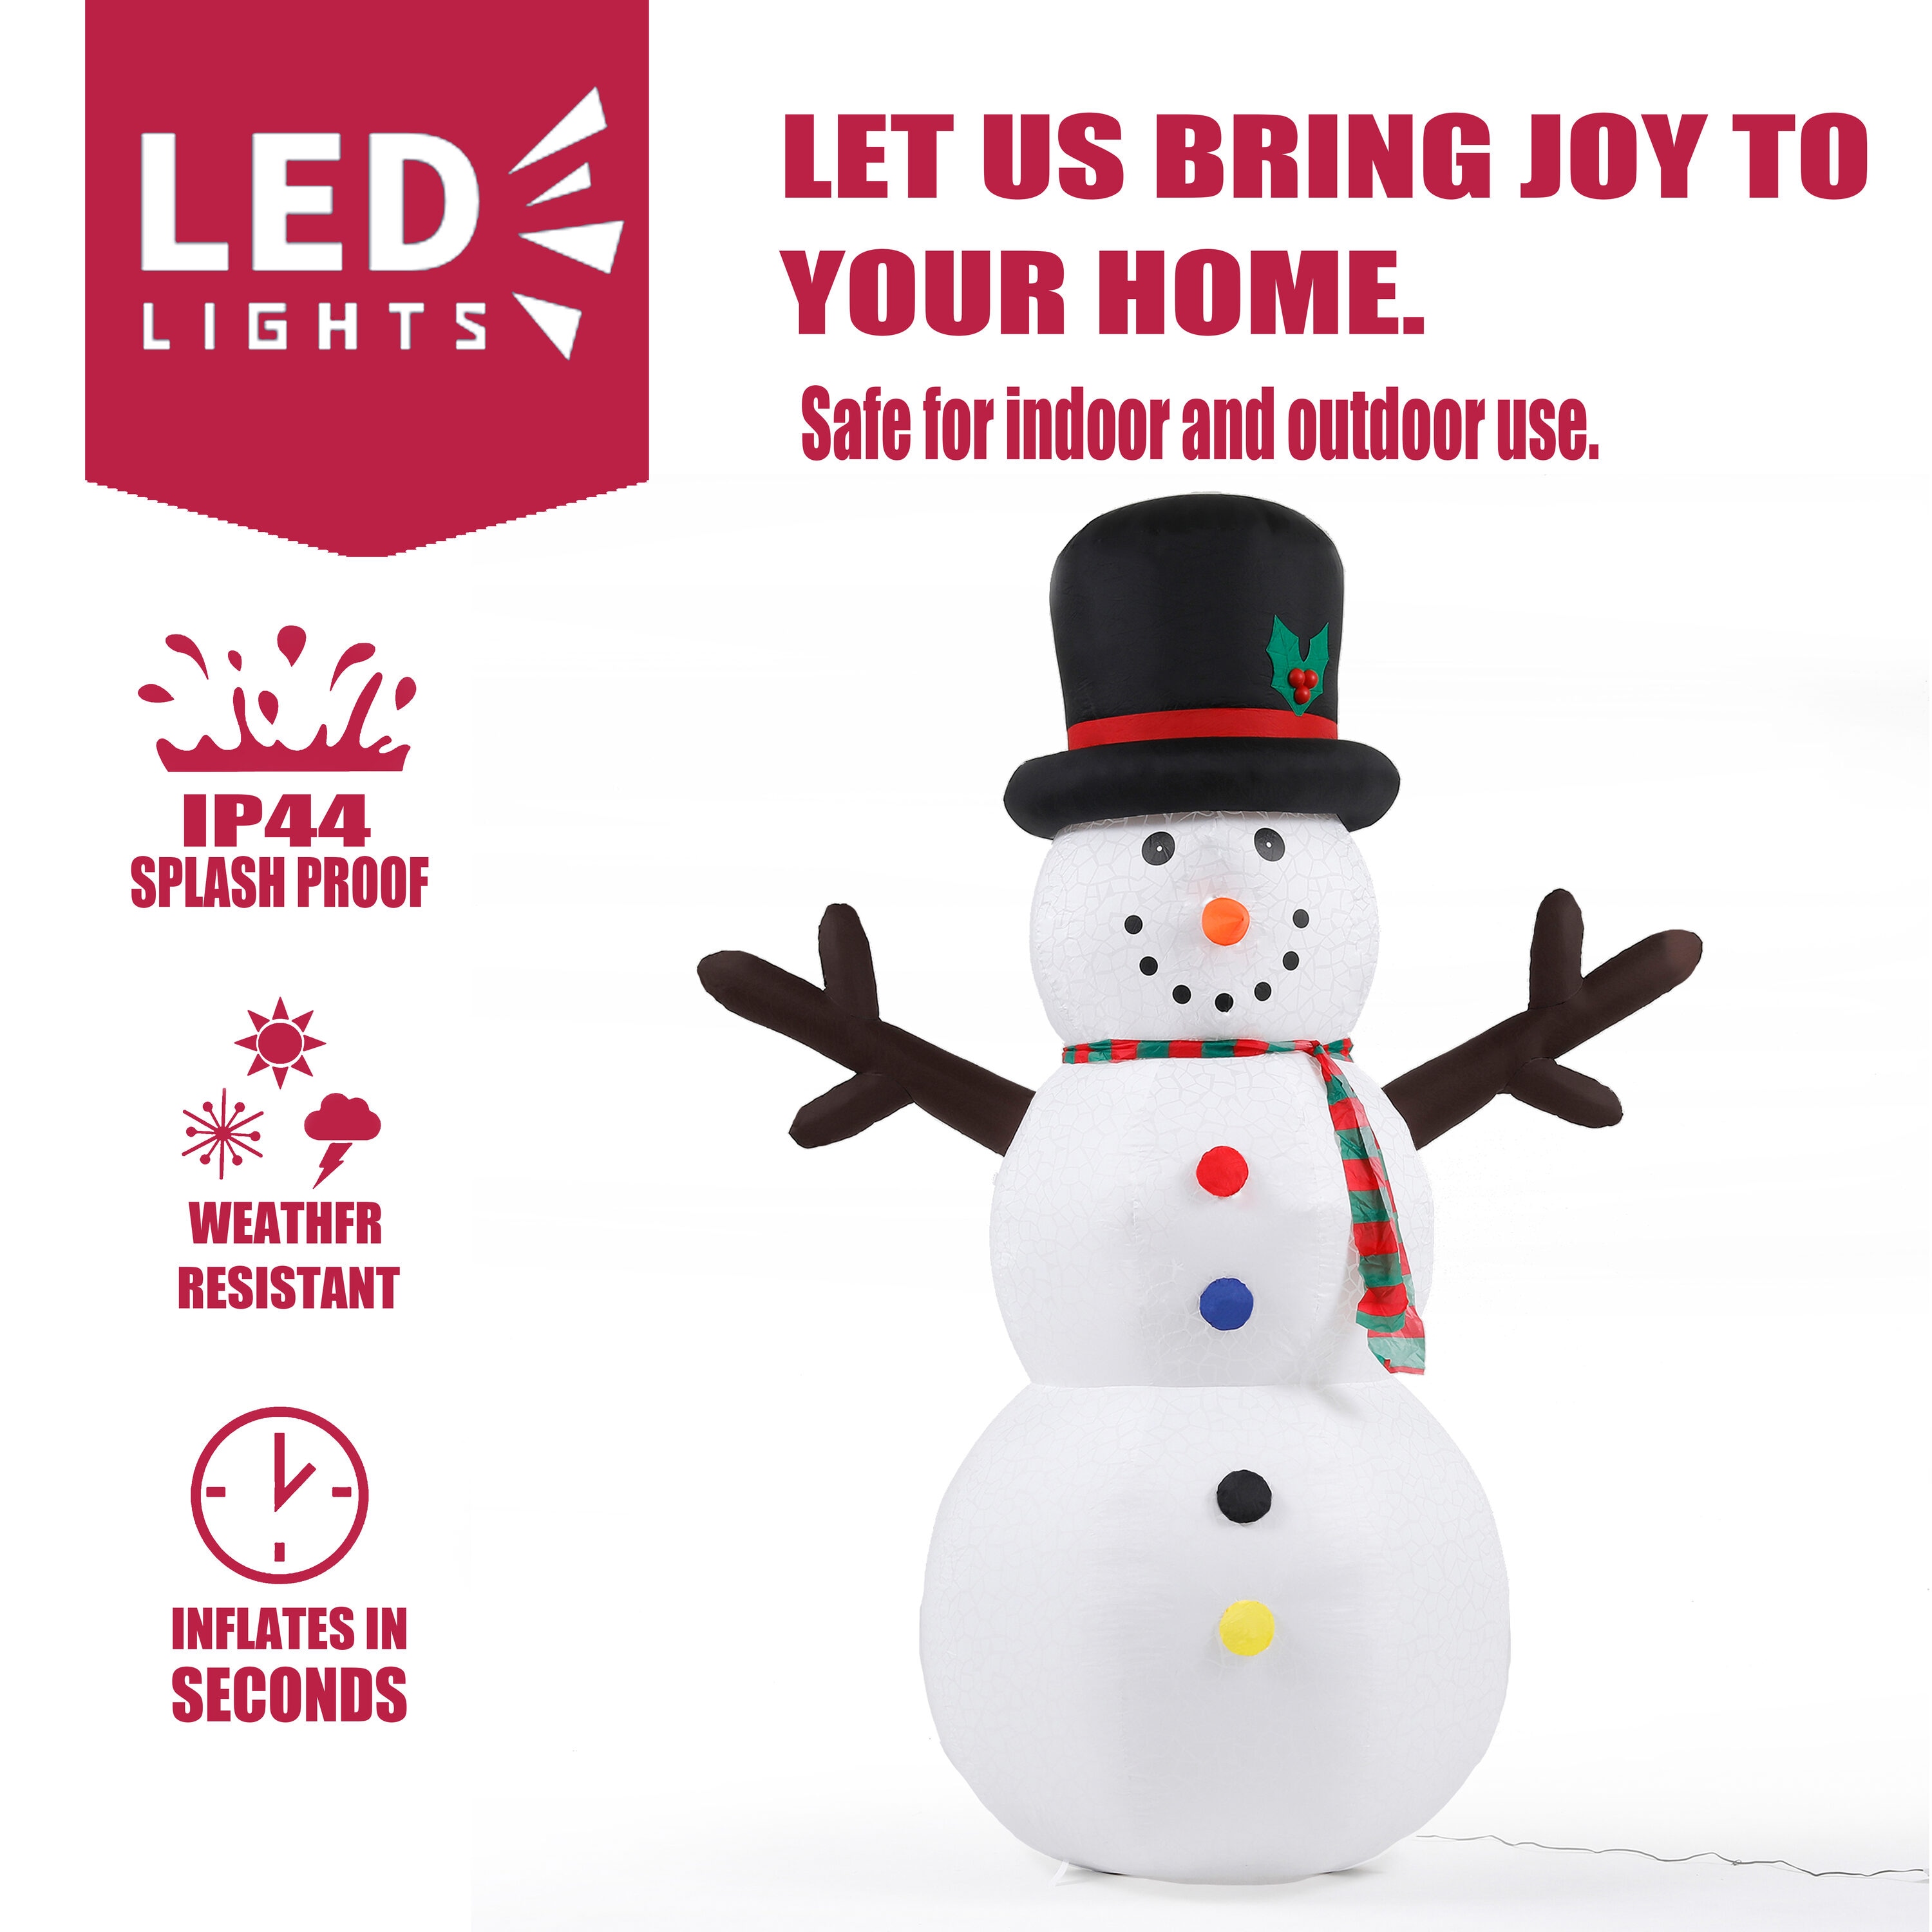 Luxen Home 8.24-ft Lighted Snowman Christmas Inflatable at Lowes.com